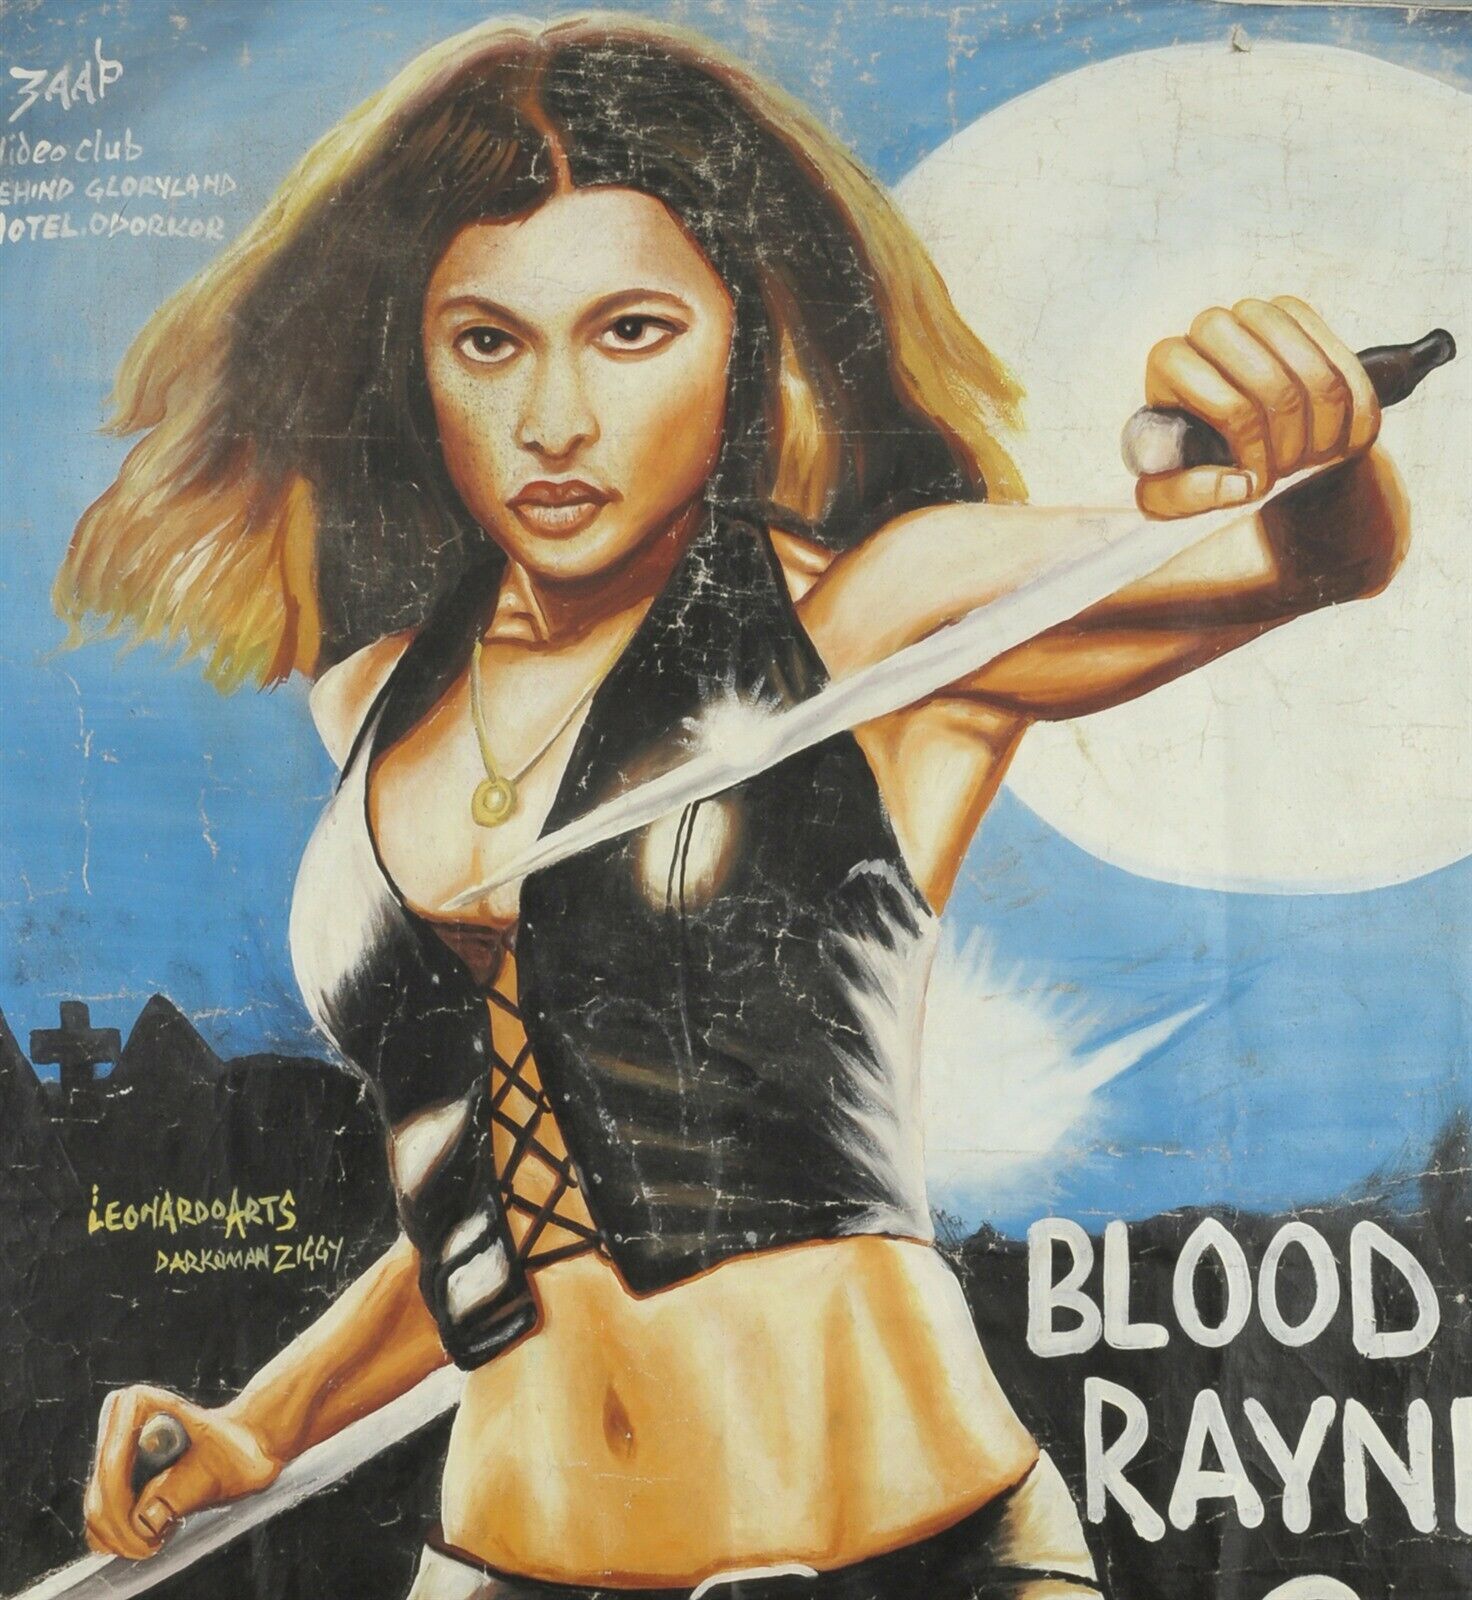 BLOODRAYNE 2 MOVIE POSTER HAND PAINTED IN GHANA ON RECYCLED FLOUR SACKS FOR THE LOCAL CINEMA DETAILS